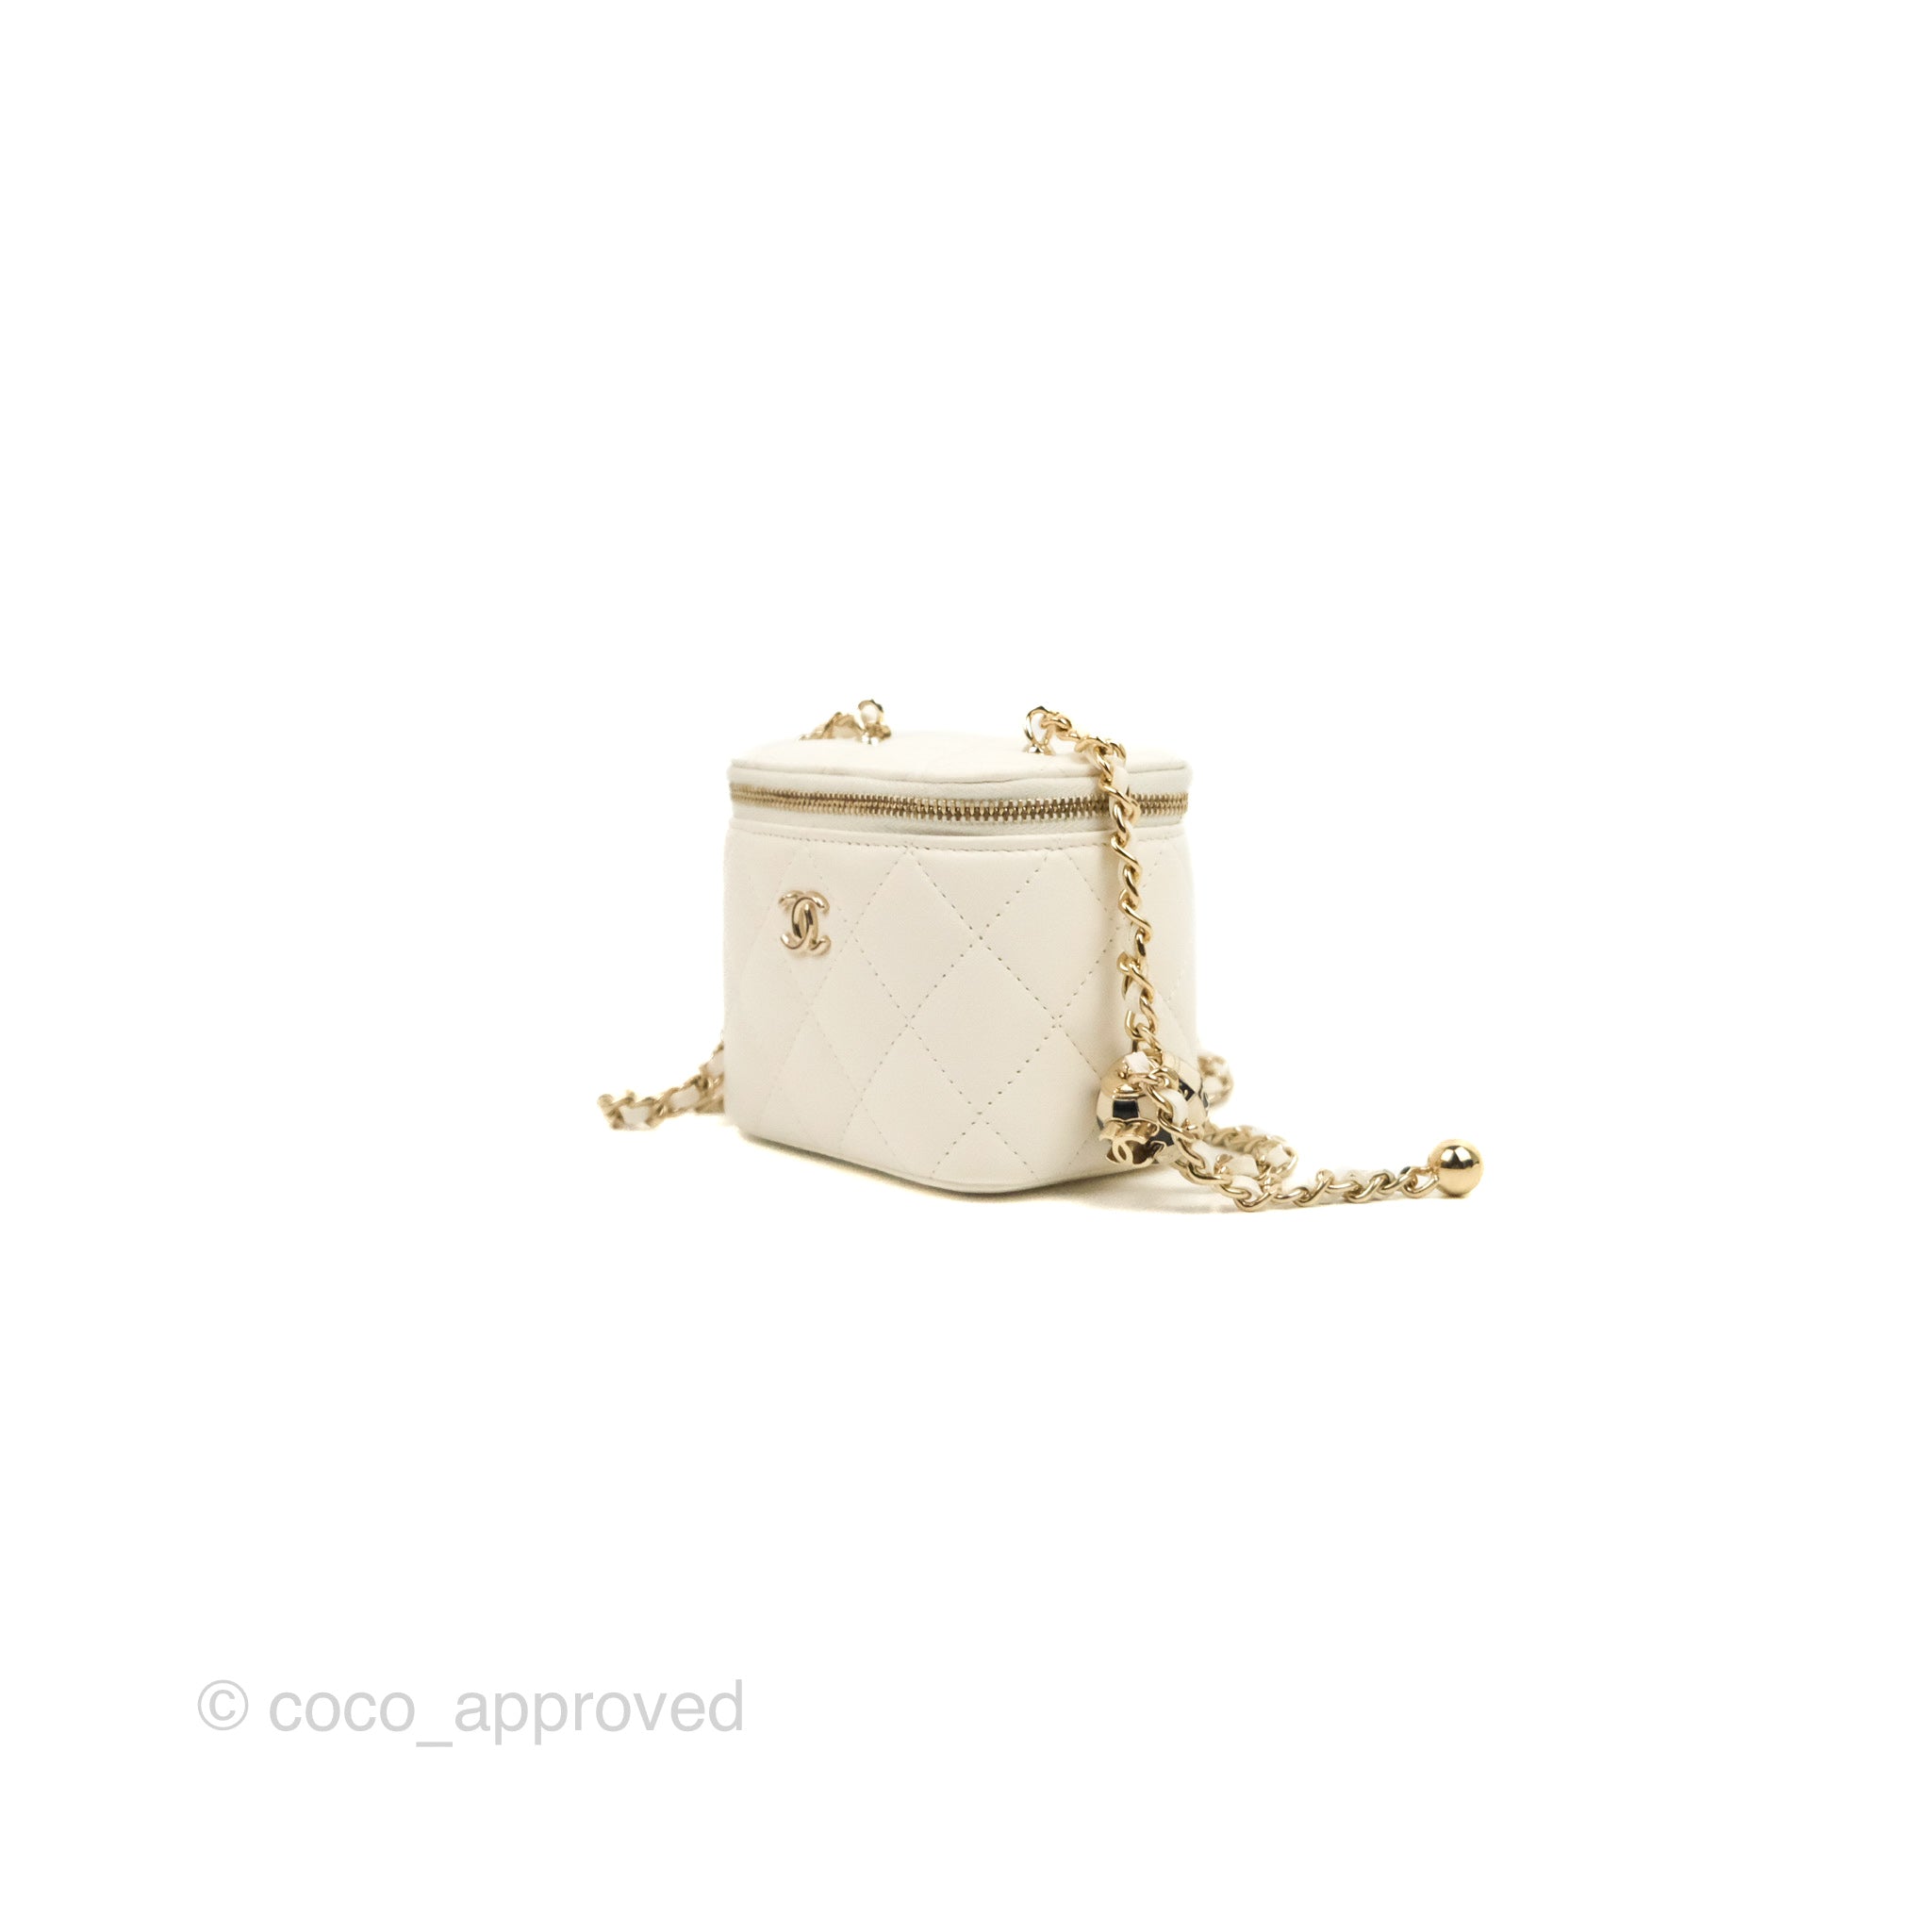 Chanel Pearl Crush Mini Vanity With Chain Lambskin Light Pink GHW